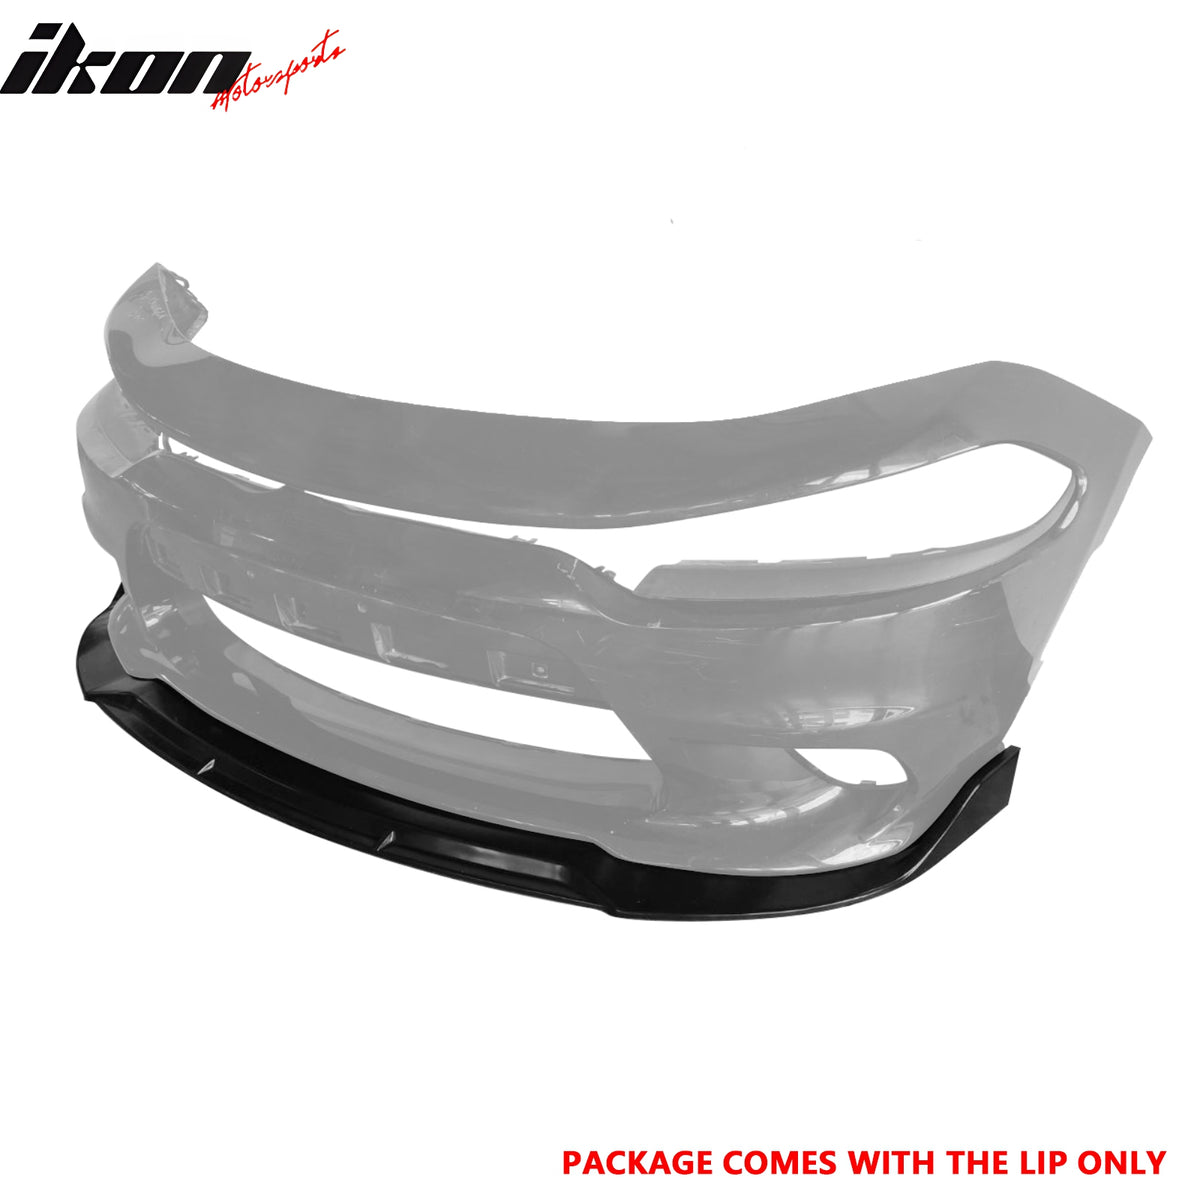 IKON MOTORSPORTS Front Bumper Lip, Compatible with 2015-2022 Dodge Charger SRT & Scat Pack, V2 Style Unpainted Black PU Polyurethane Air Dam Chin Spoiler Protector Splitter